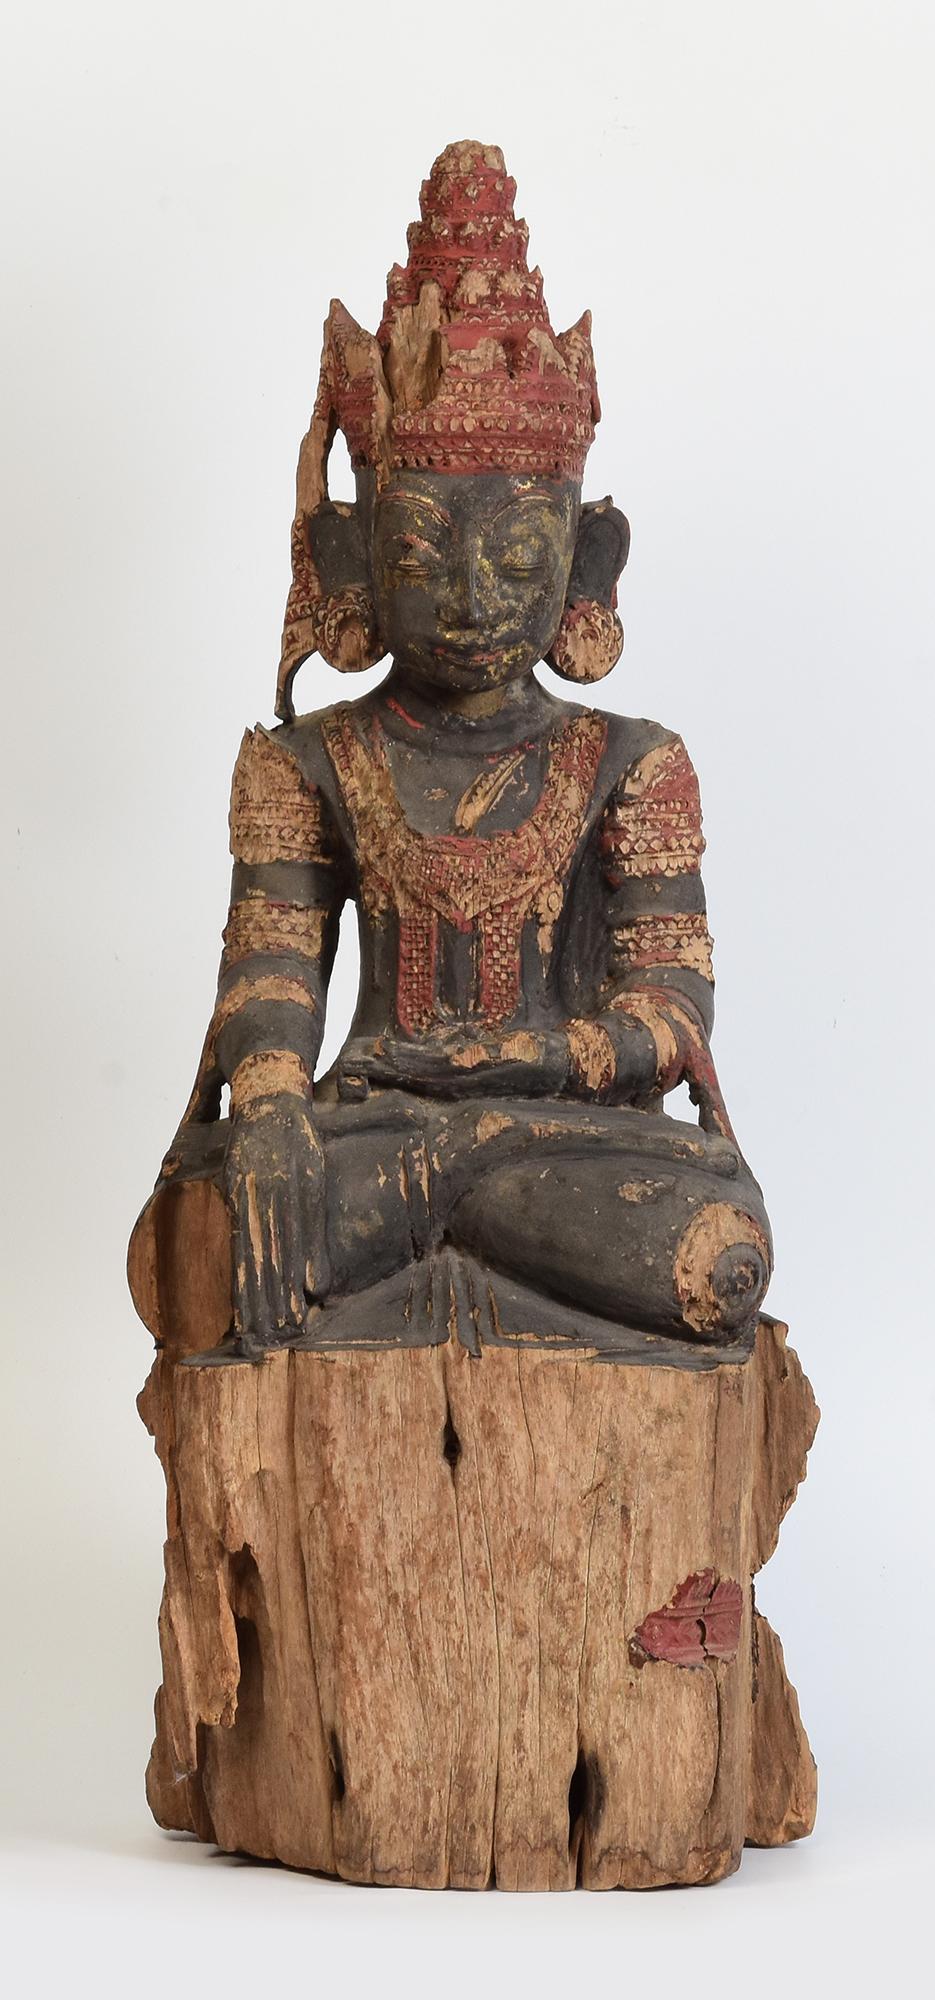 16th Century, Ava, Rare Antique Burmese Wooden Seated Crowned Buddha For Sale 10